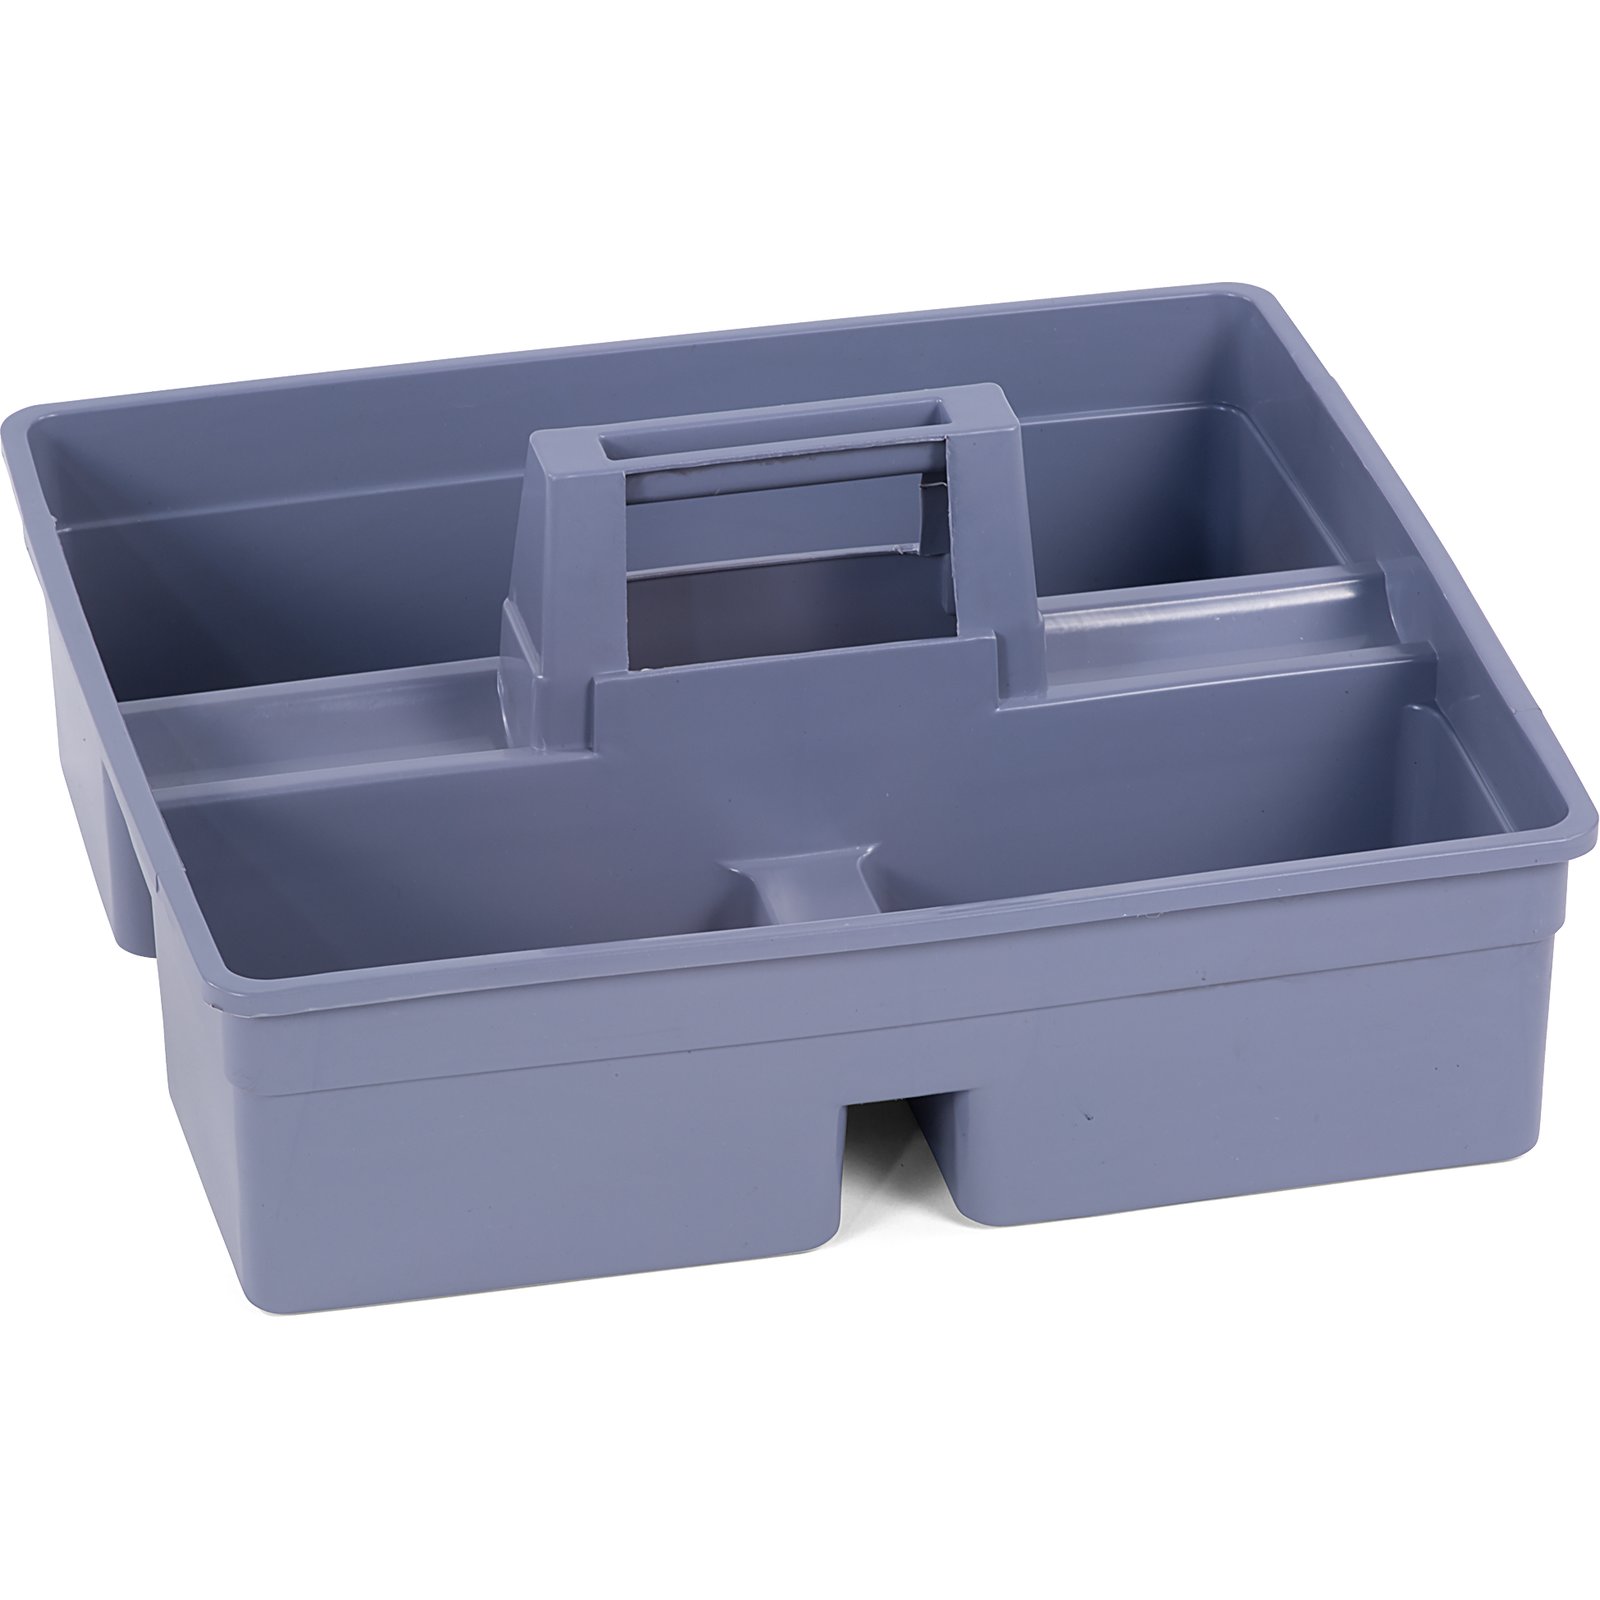 Carlisle 3-Compartment Tool 
Caddy for Janitorial Cart, 
Gray